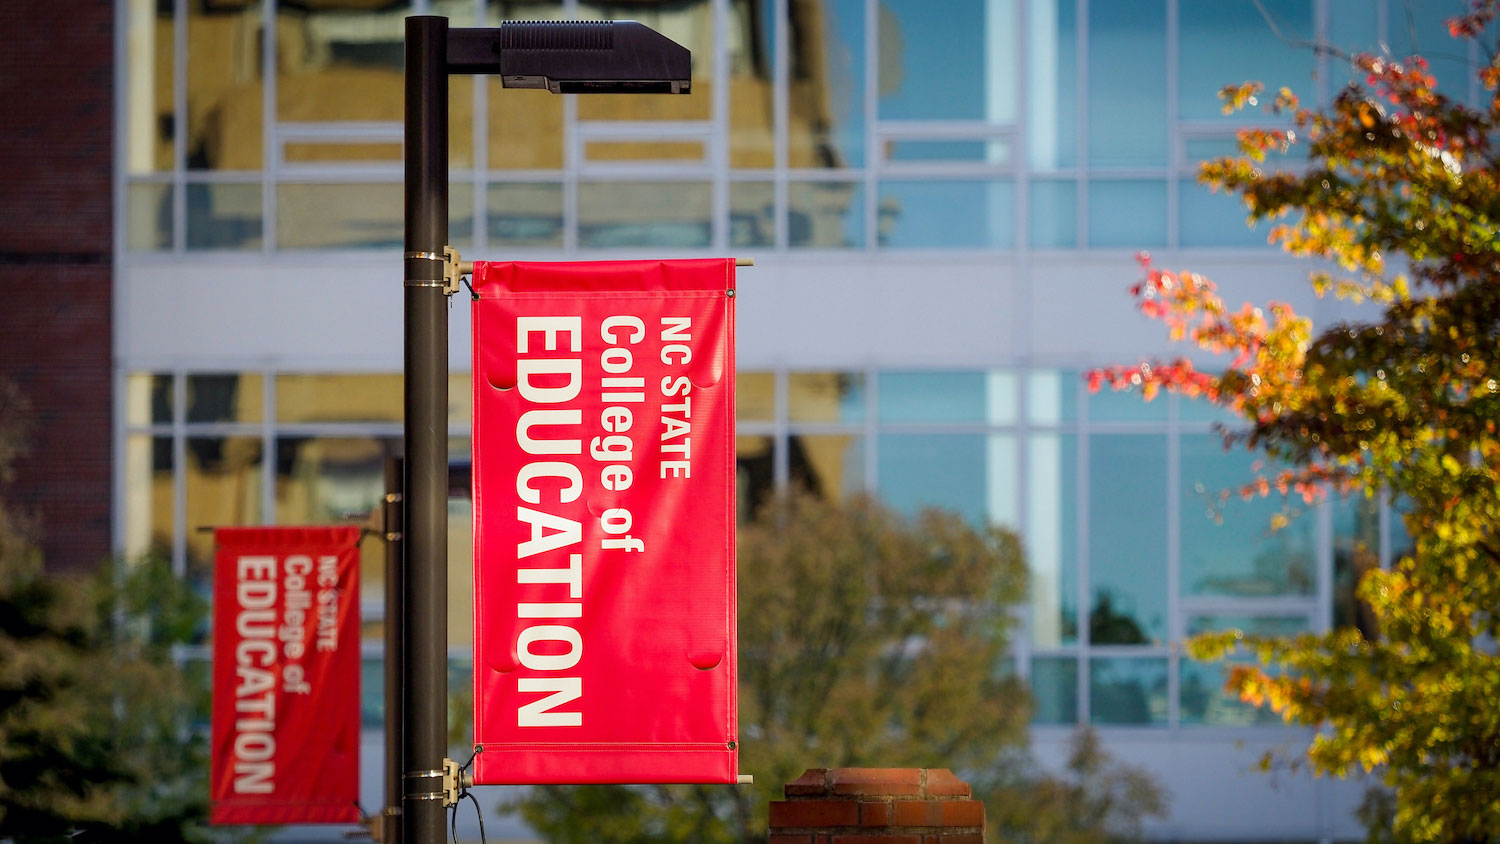 College of Education Banners